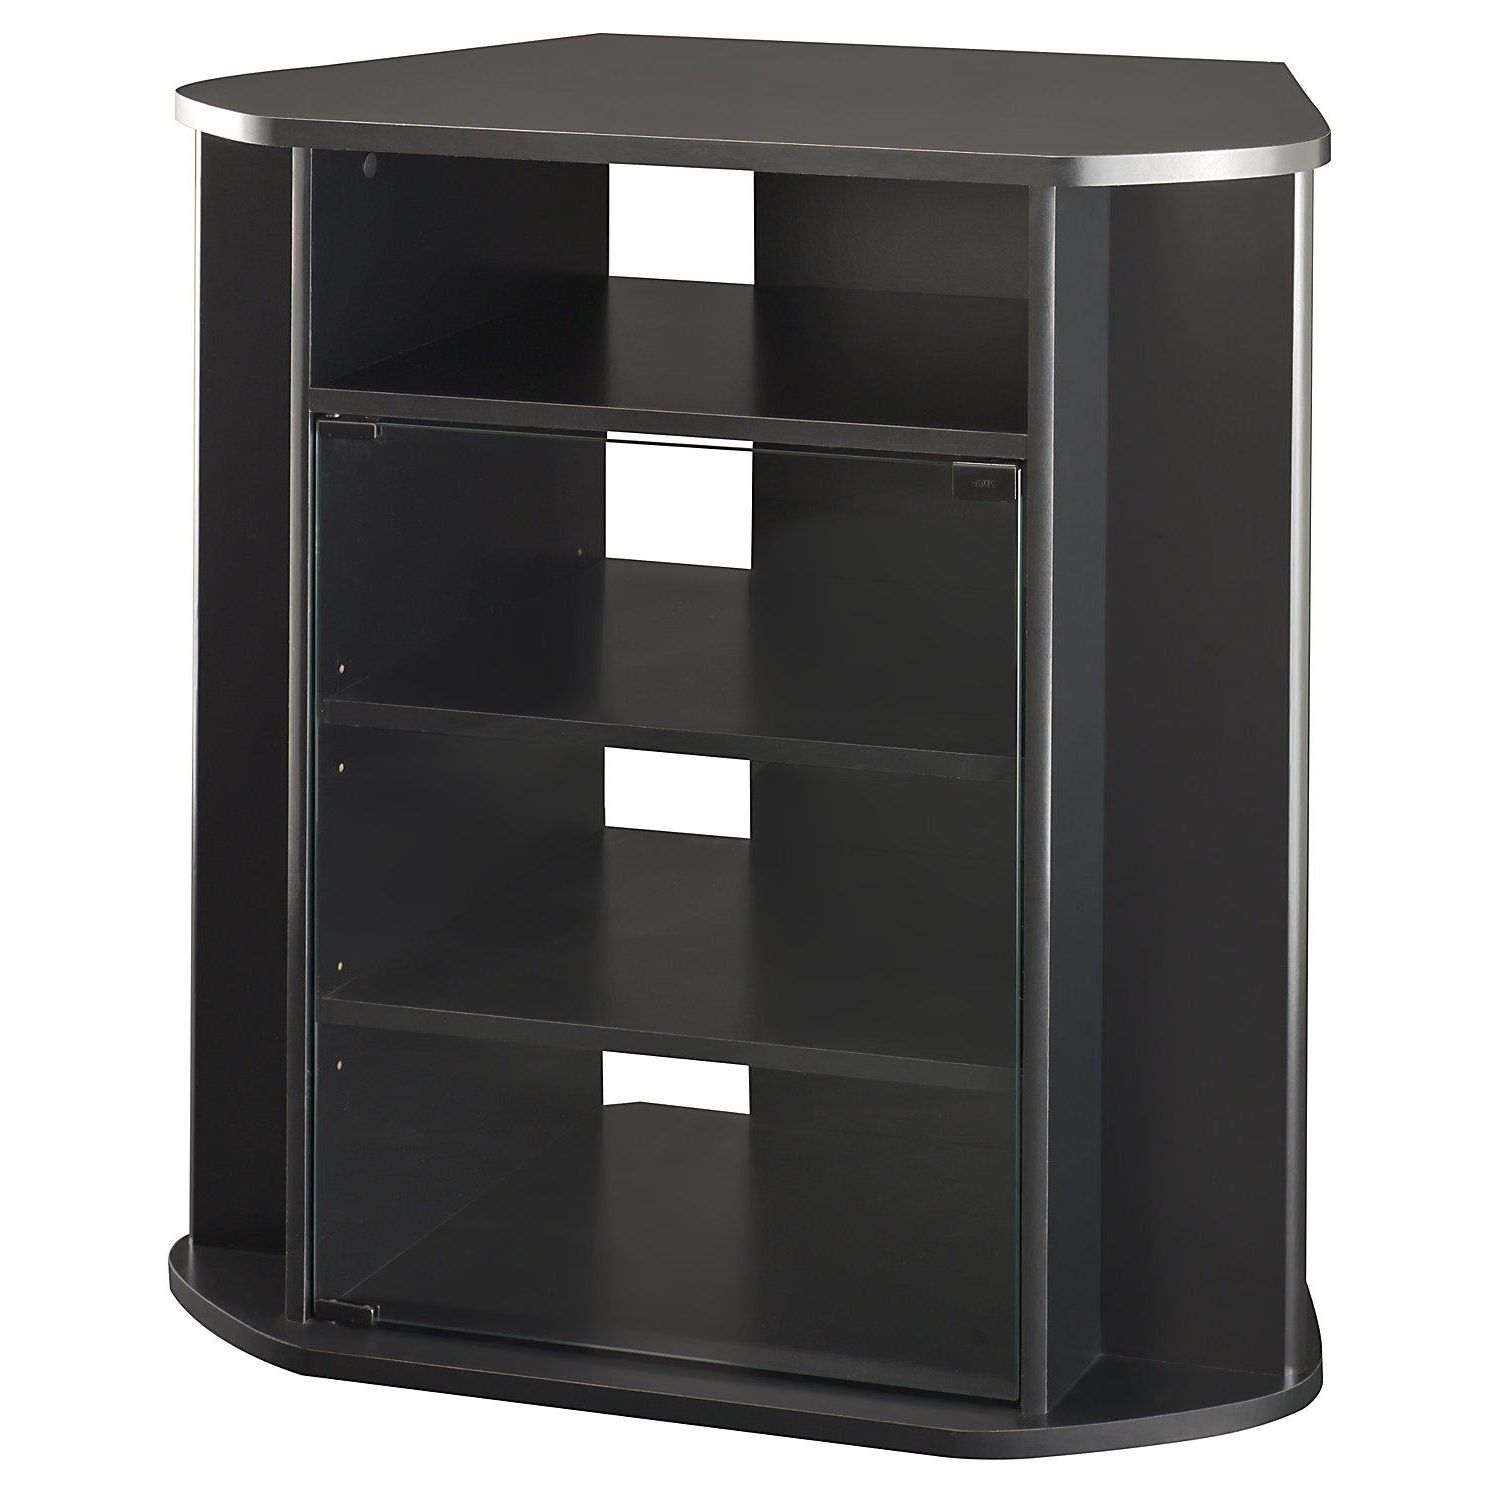 Tall Black Corner Tv Cabinet With Glass Doors And Four Shelves Of For Famous Black Corner Tv Cabinets With Glass Doors (Photo 4 of 20)